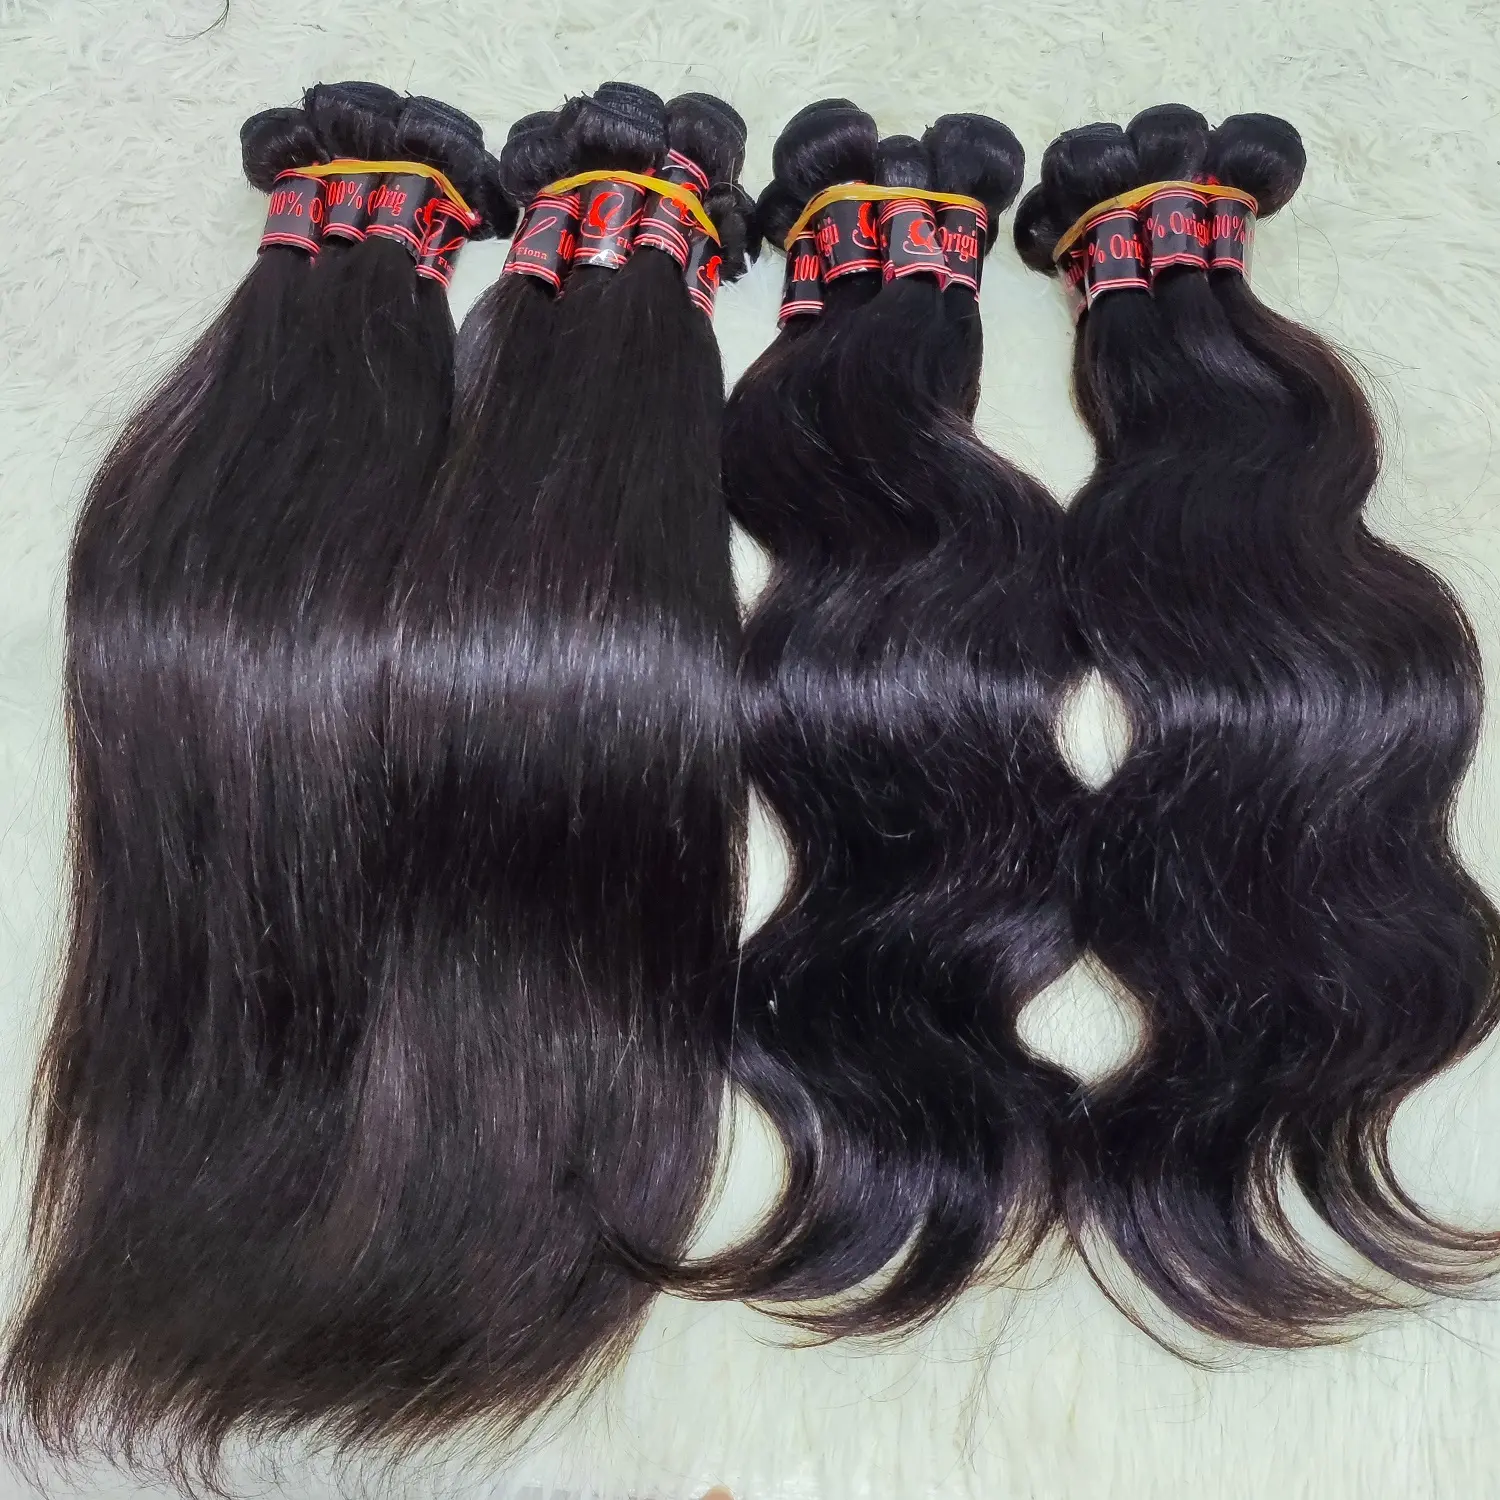 Letsfly Cheap 18inch Silky Straight Body Wave Hair Extensions Wholesale Natural Hair Brazilian Remy Hair Bundles Fast Shipping